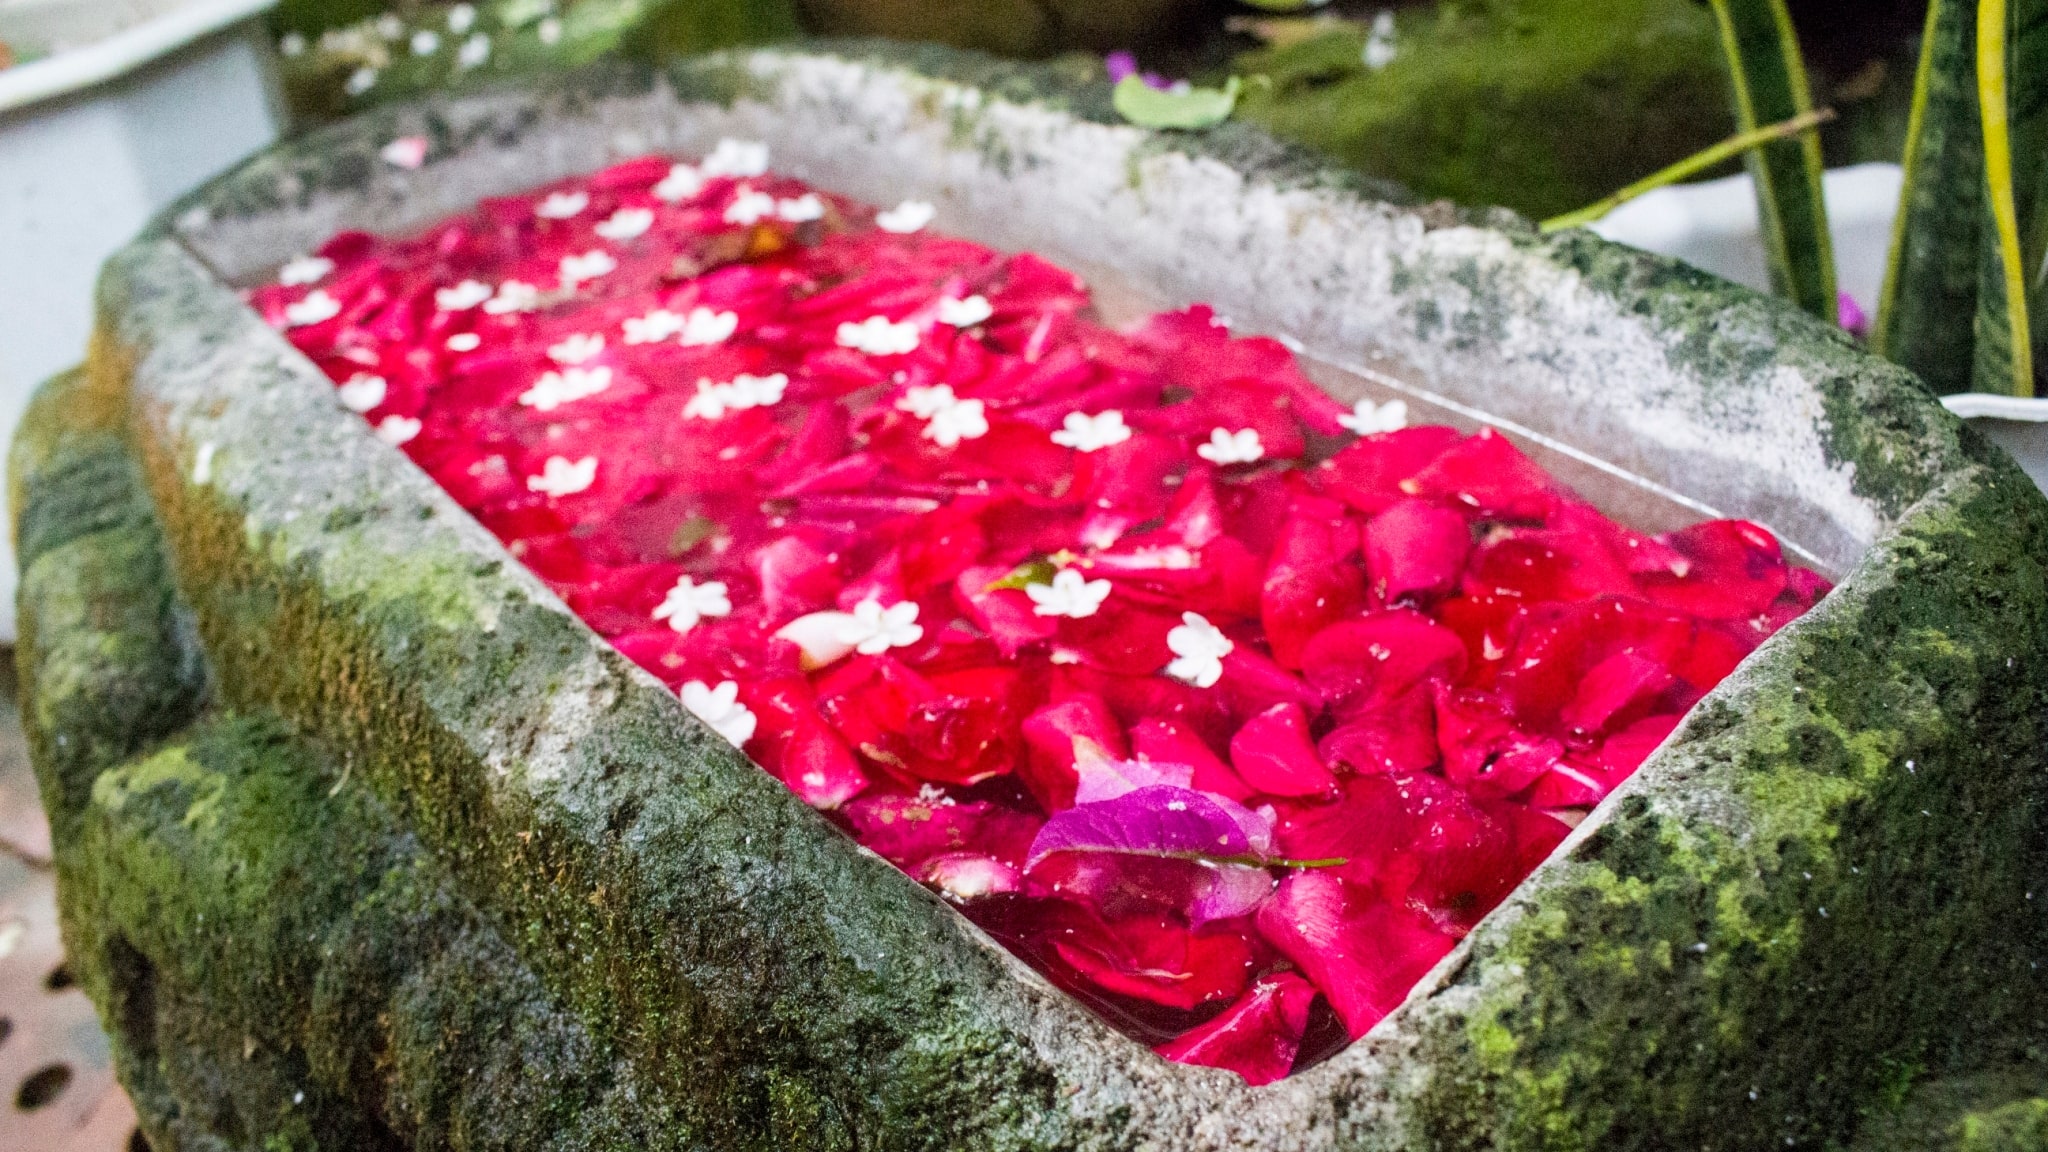 Flowers that have fallen down to the ground are arranged in water and used as a display.【Photo by Matt Serrano】